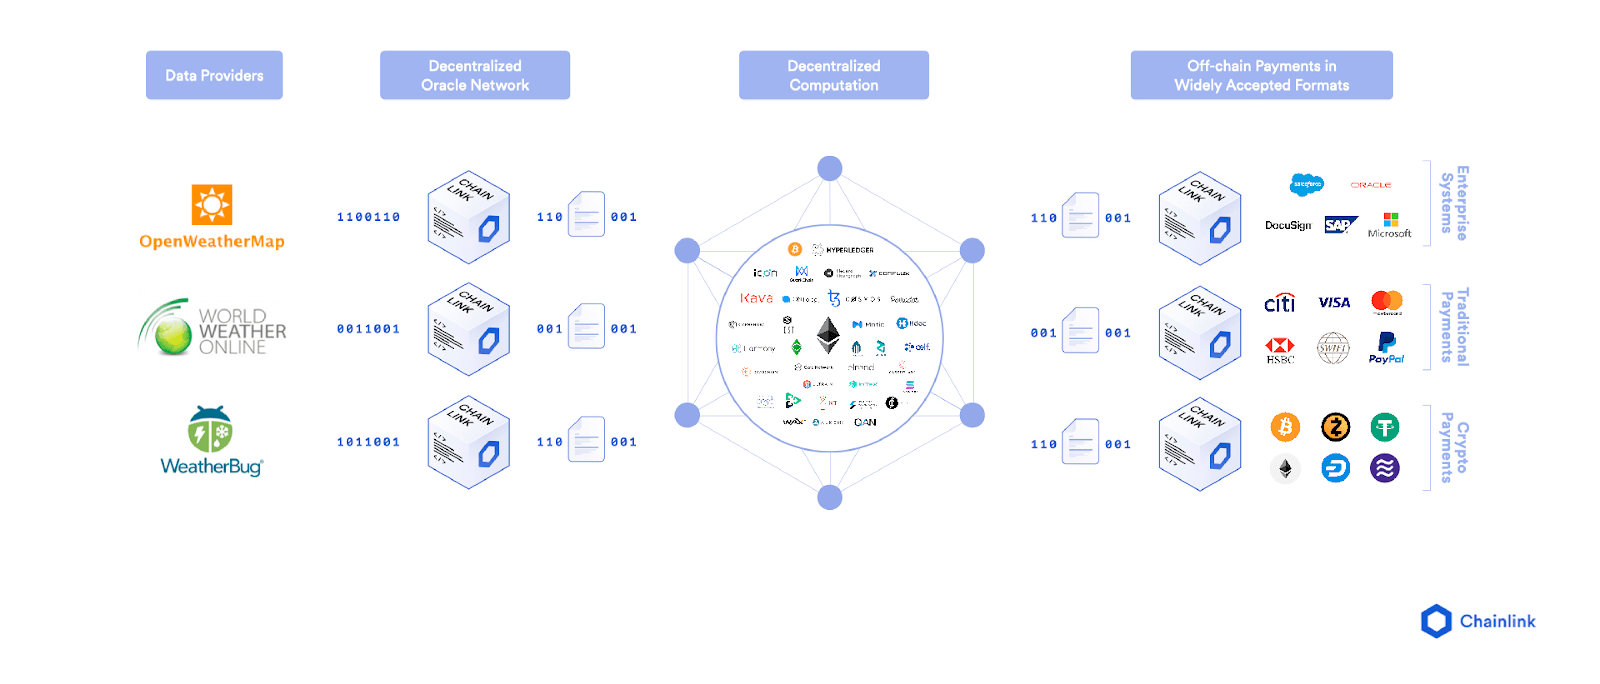 Decentralized Computation Powered by Chainlink Oracles